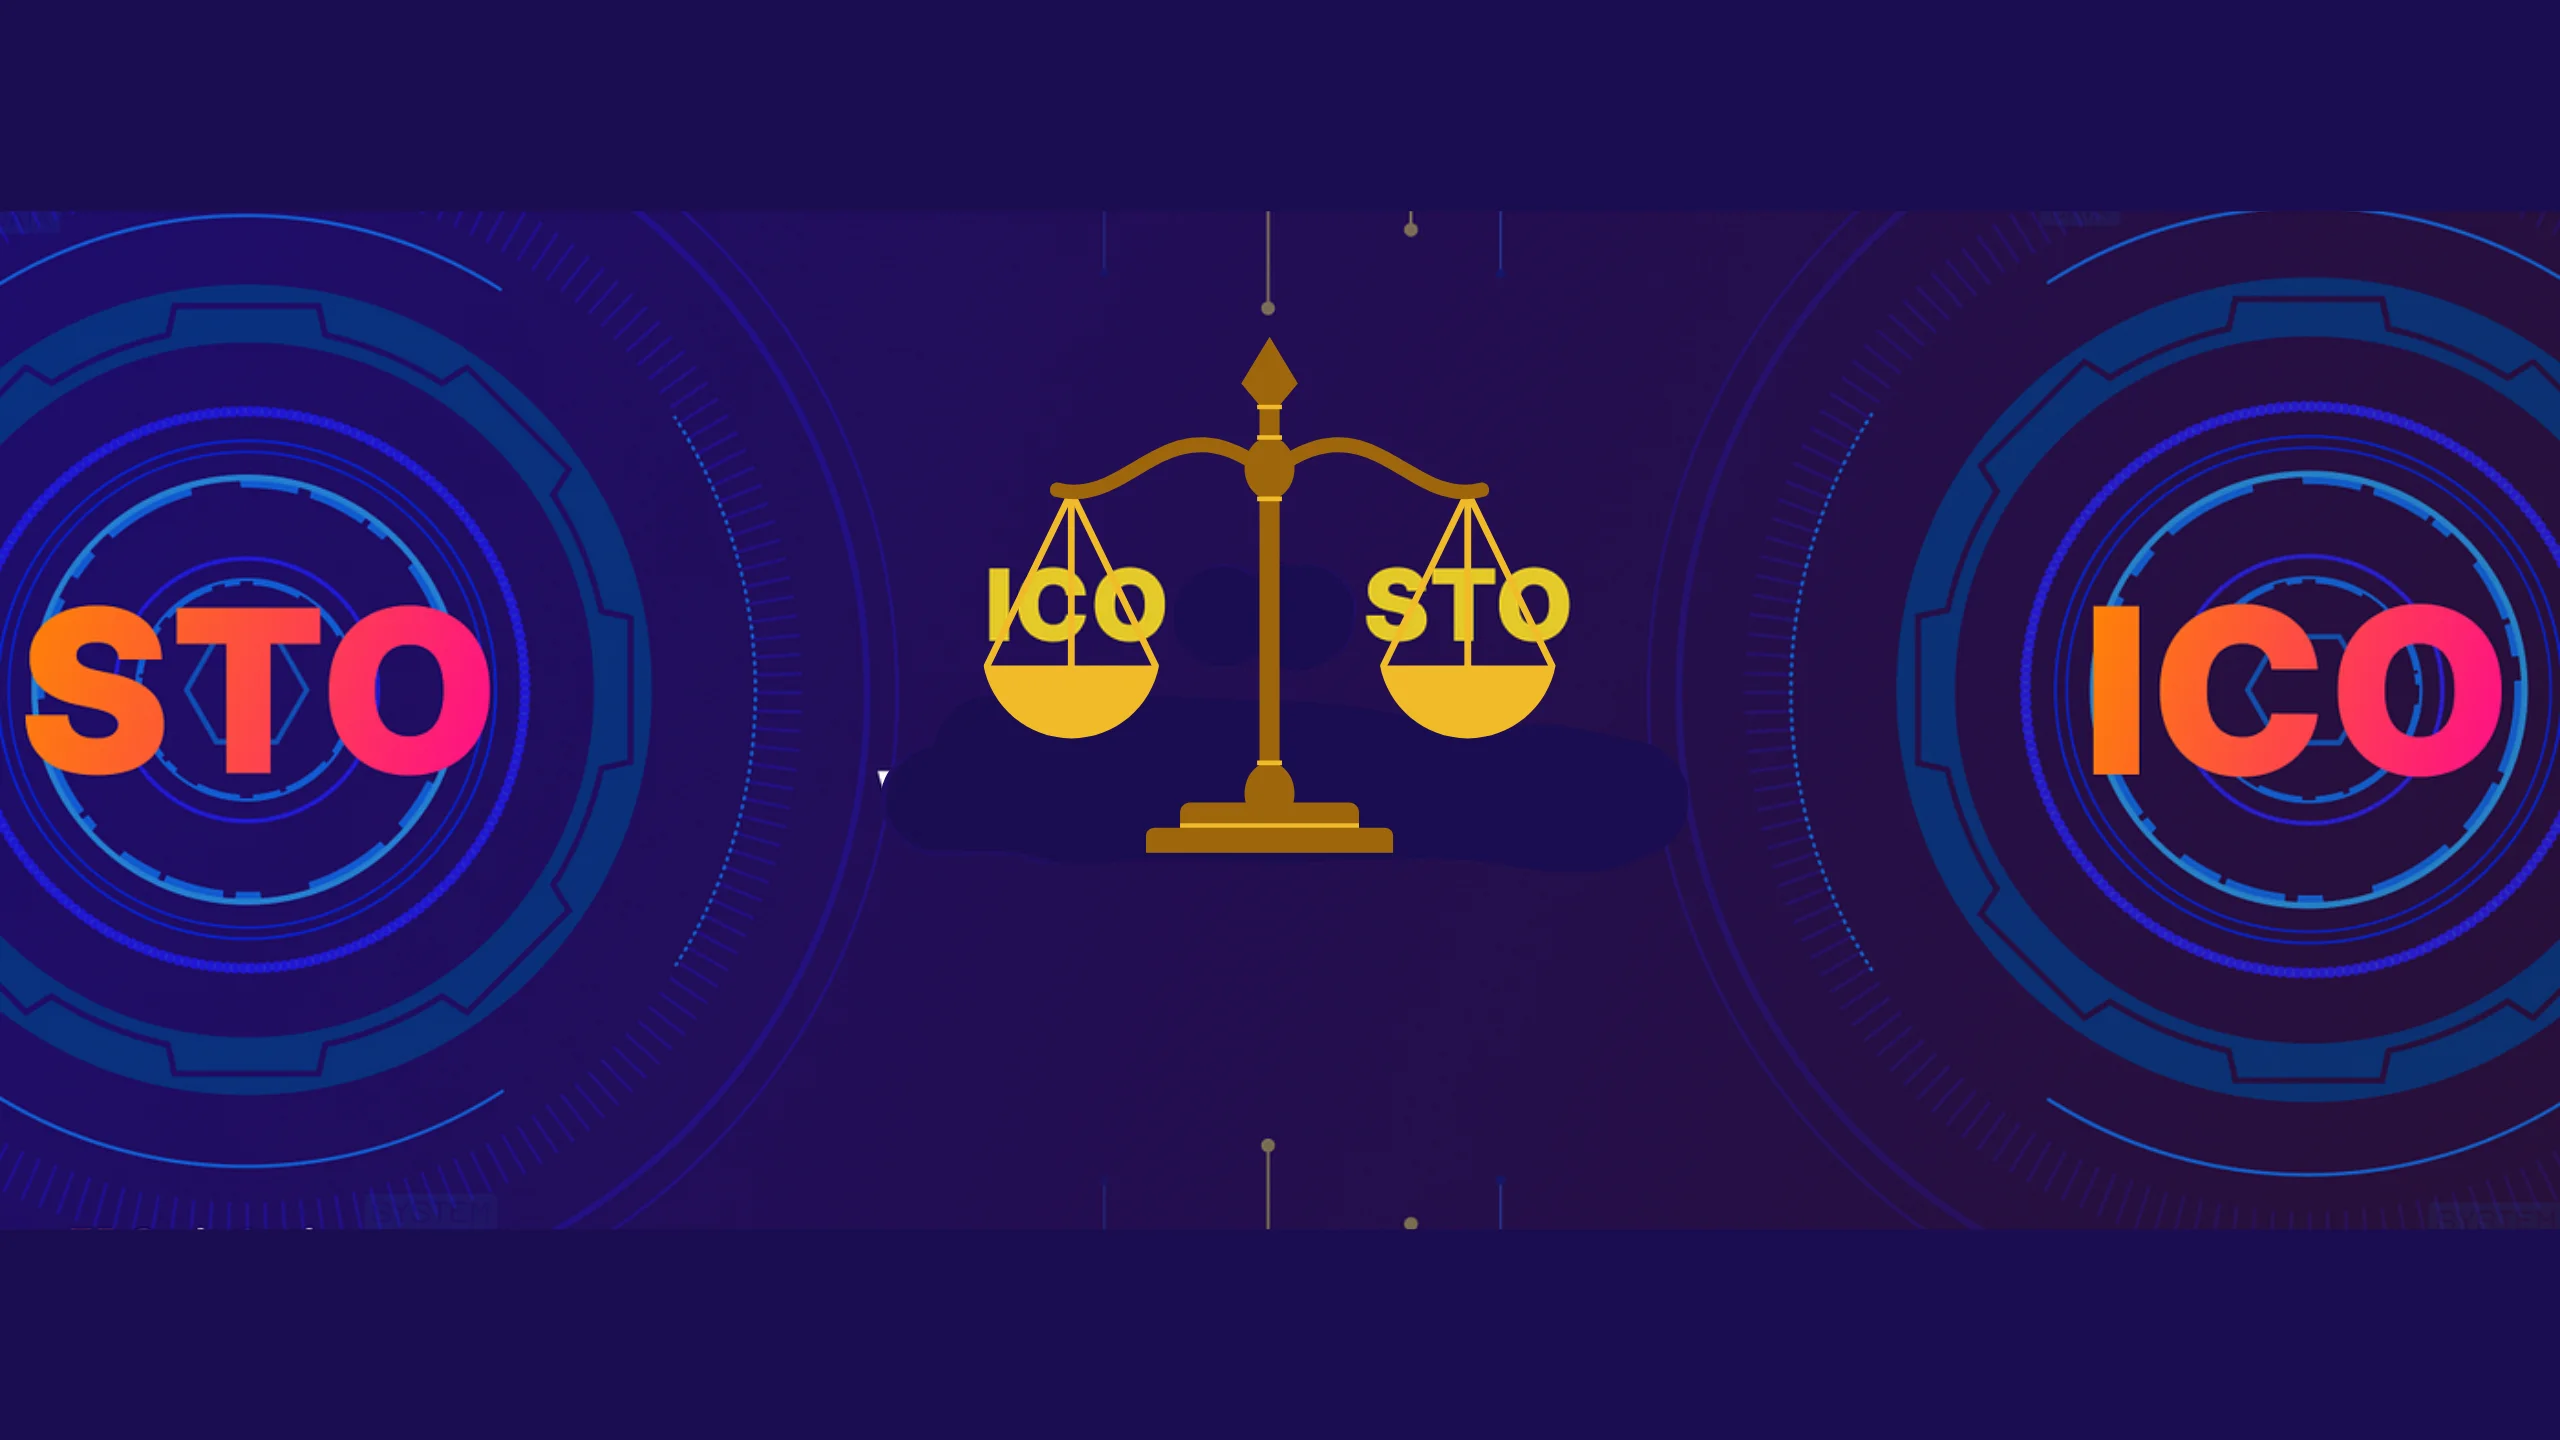 Legal Status of ICOs and STOs: ICOs often face uncertain regulatory frameworks, while STOs are typically compliant with security regulations, offering more legal clarity.